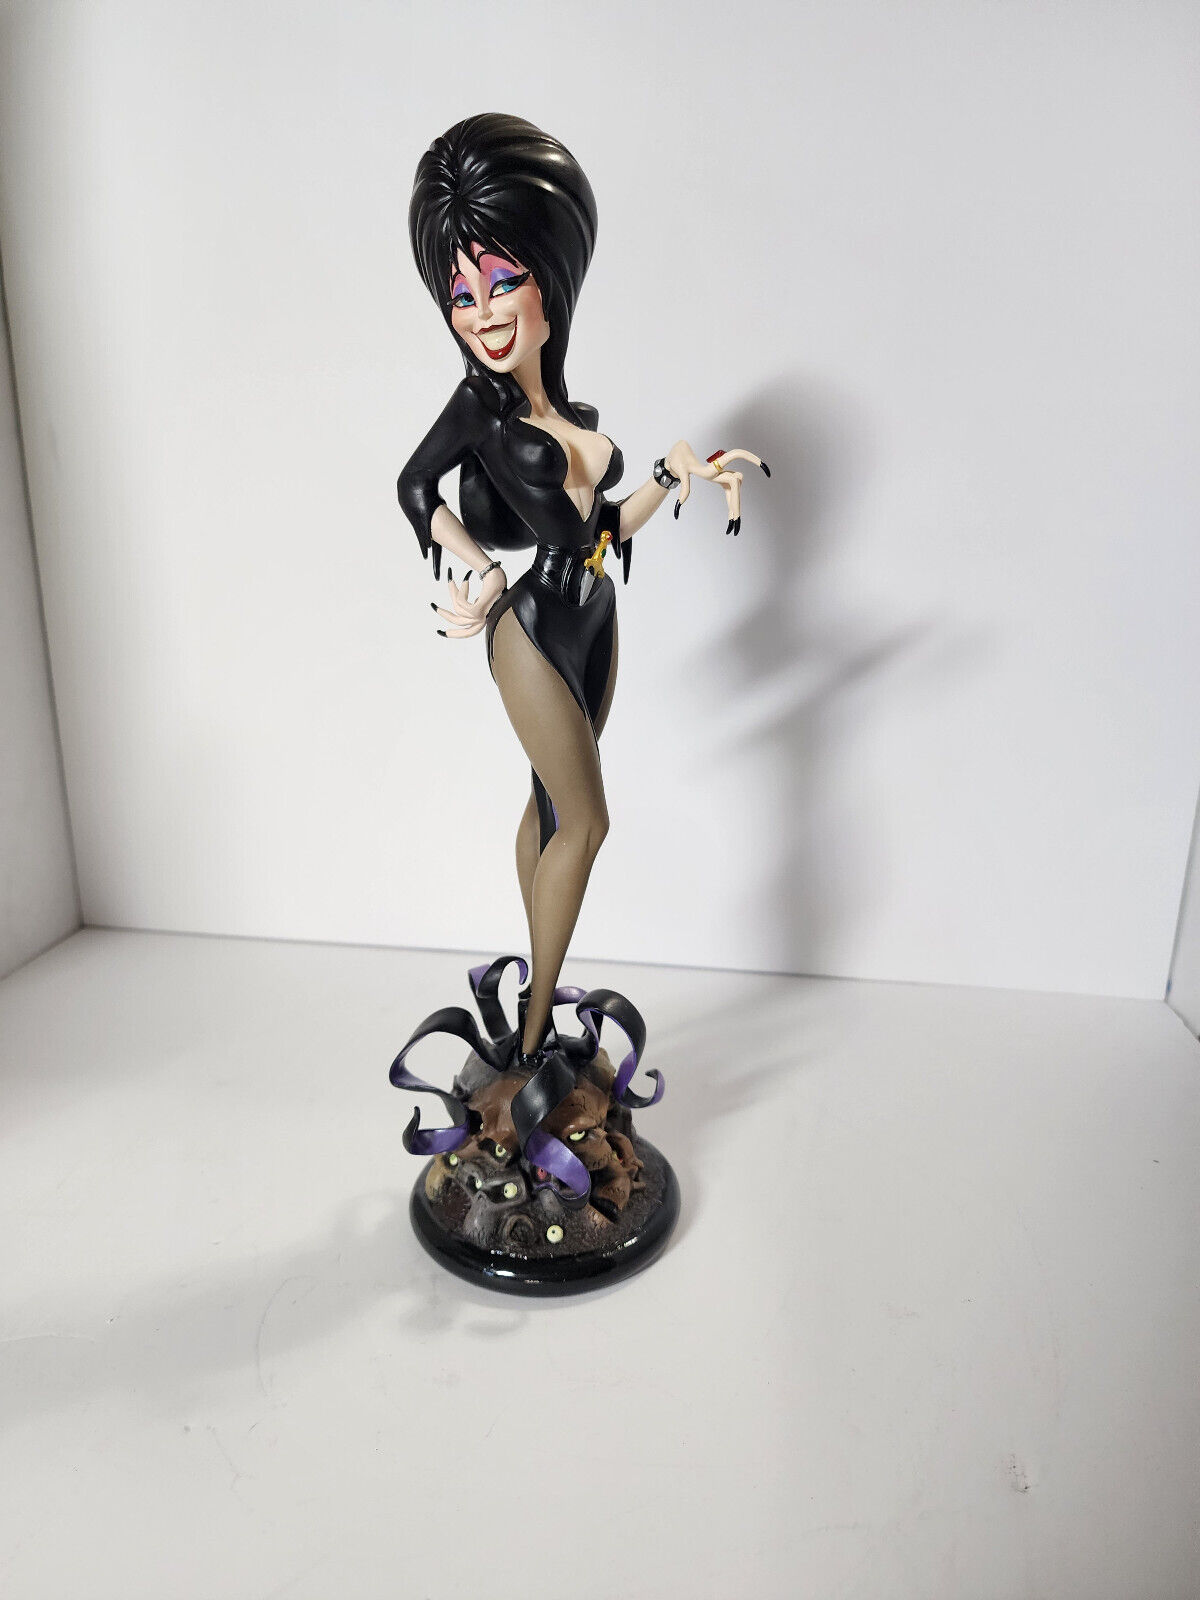 ELVIRA MISTRESS OF THE DARK MAQUETTE STATUE Electric Tiki Tooned-Up Television